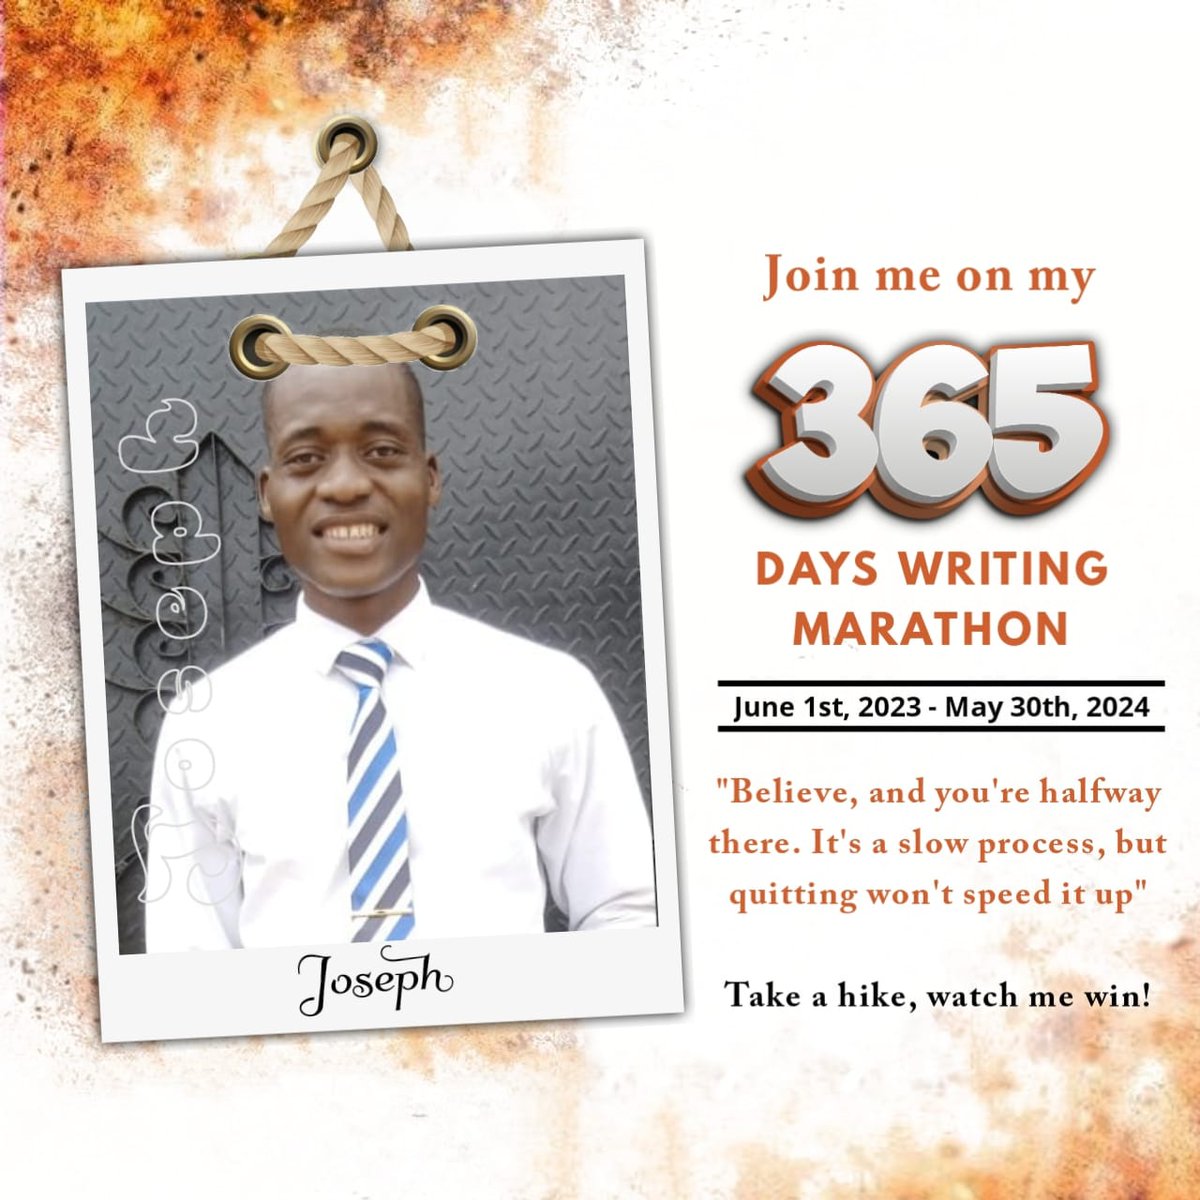 This thrilling journey starts today! 
I can do it.
I will do it.

#the365wm 
#the365writingmarathon